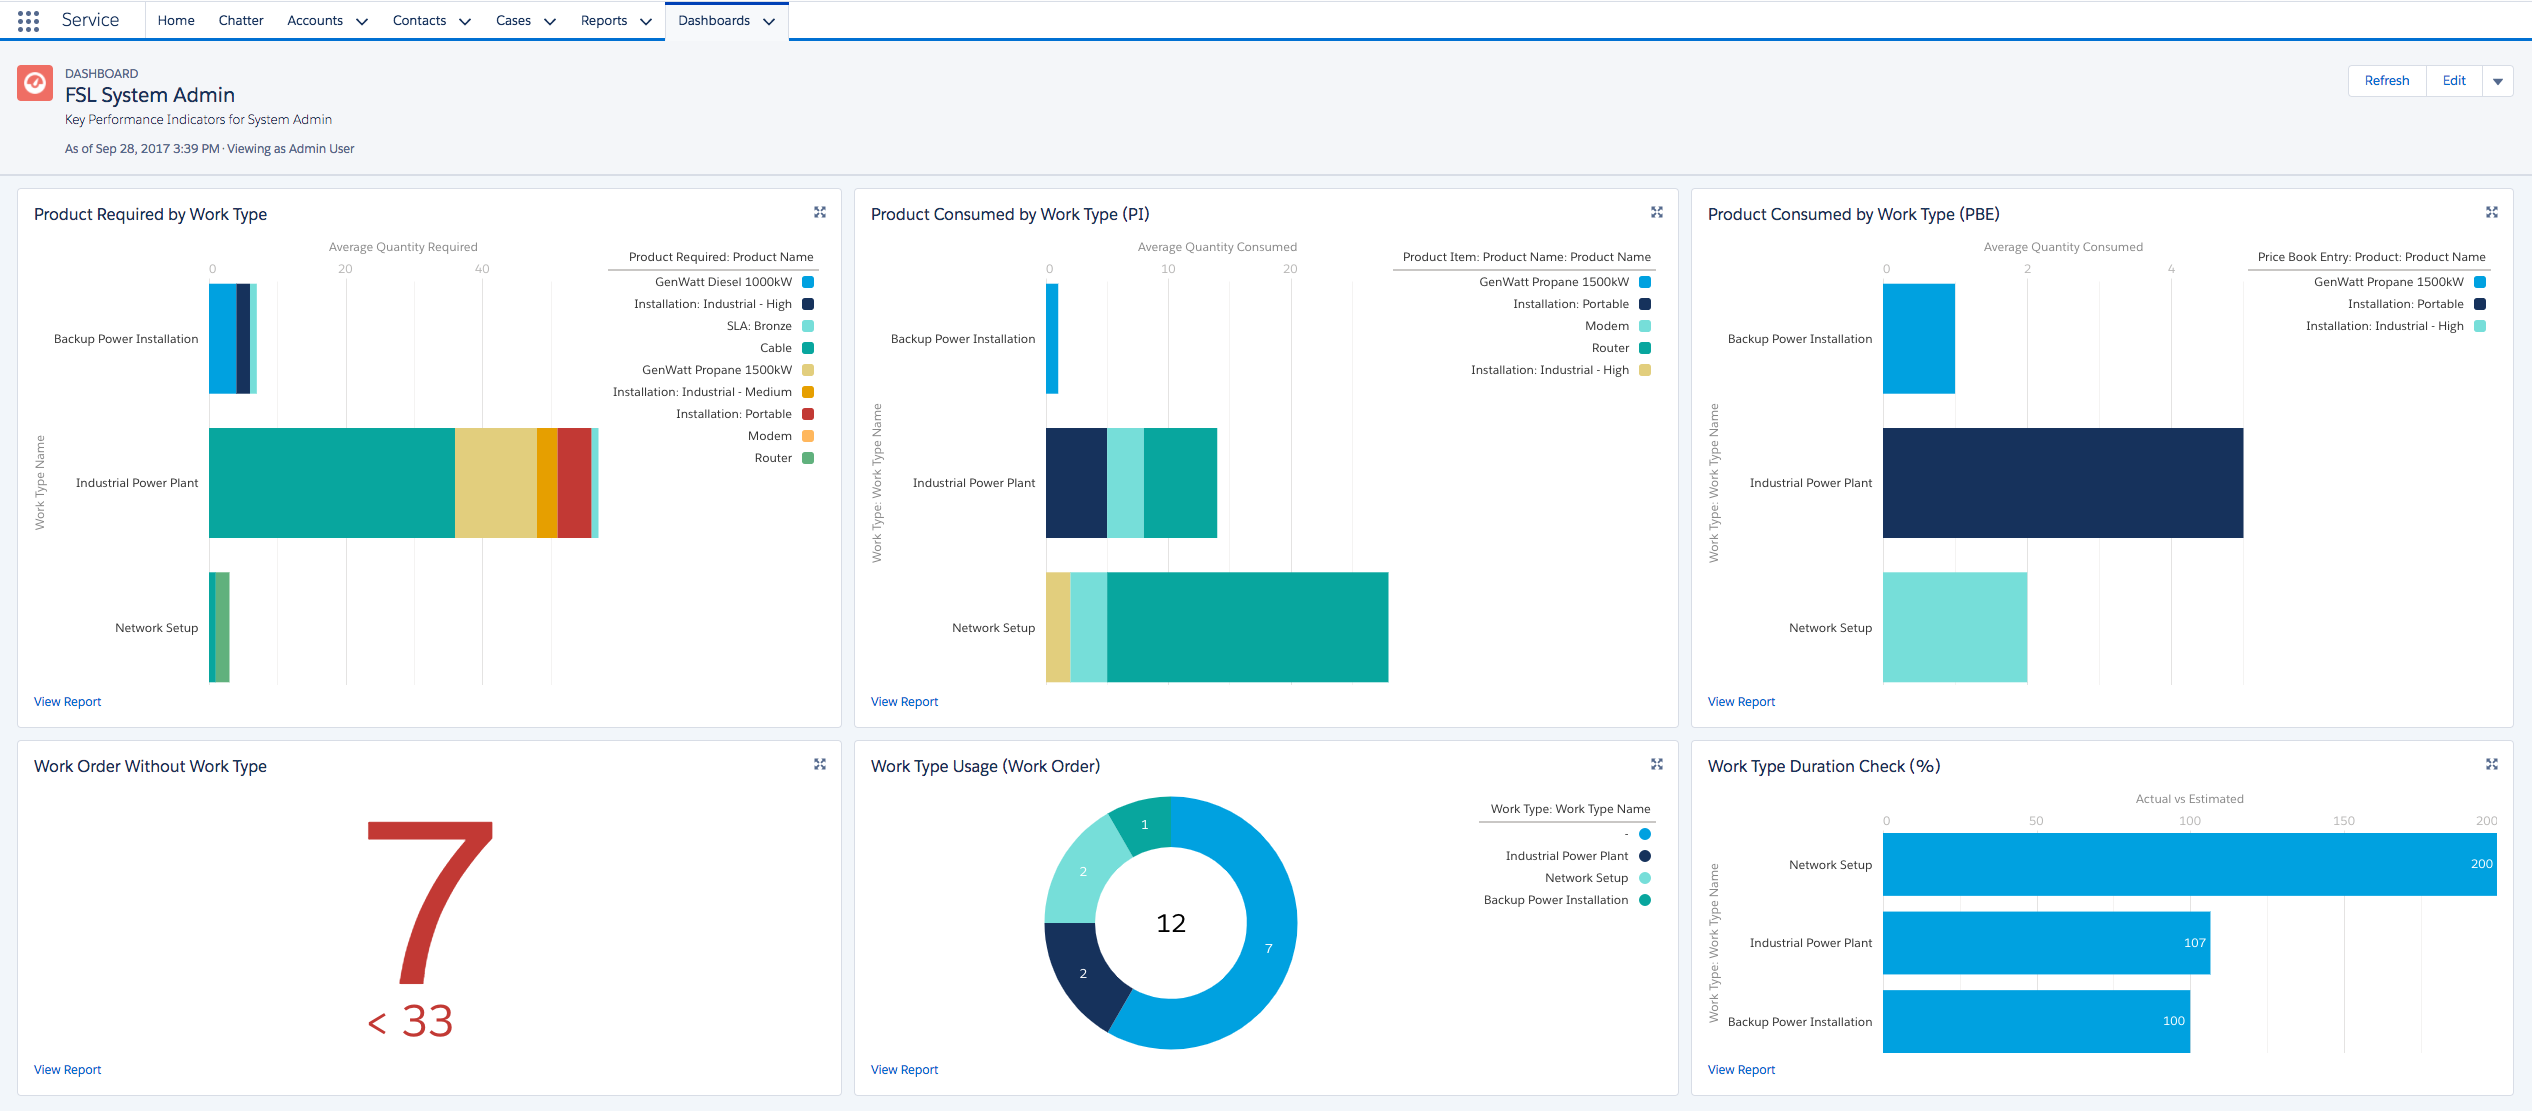 15 Tips for Awesome Salesforce Reports and Dashboards - Ad Victoriam Salesforce Blog